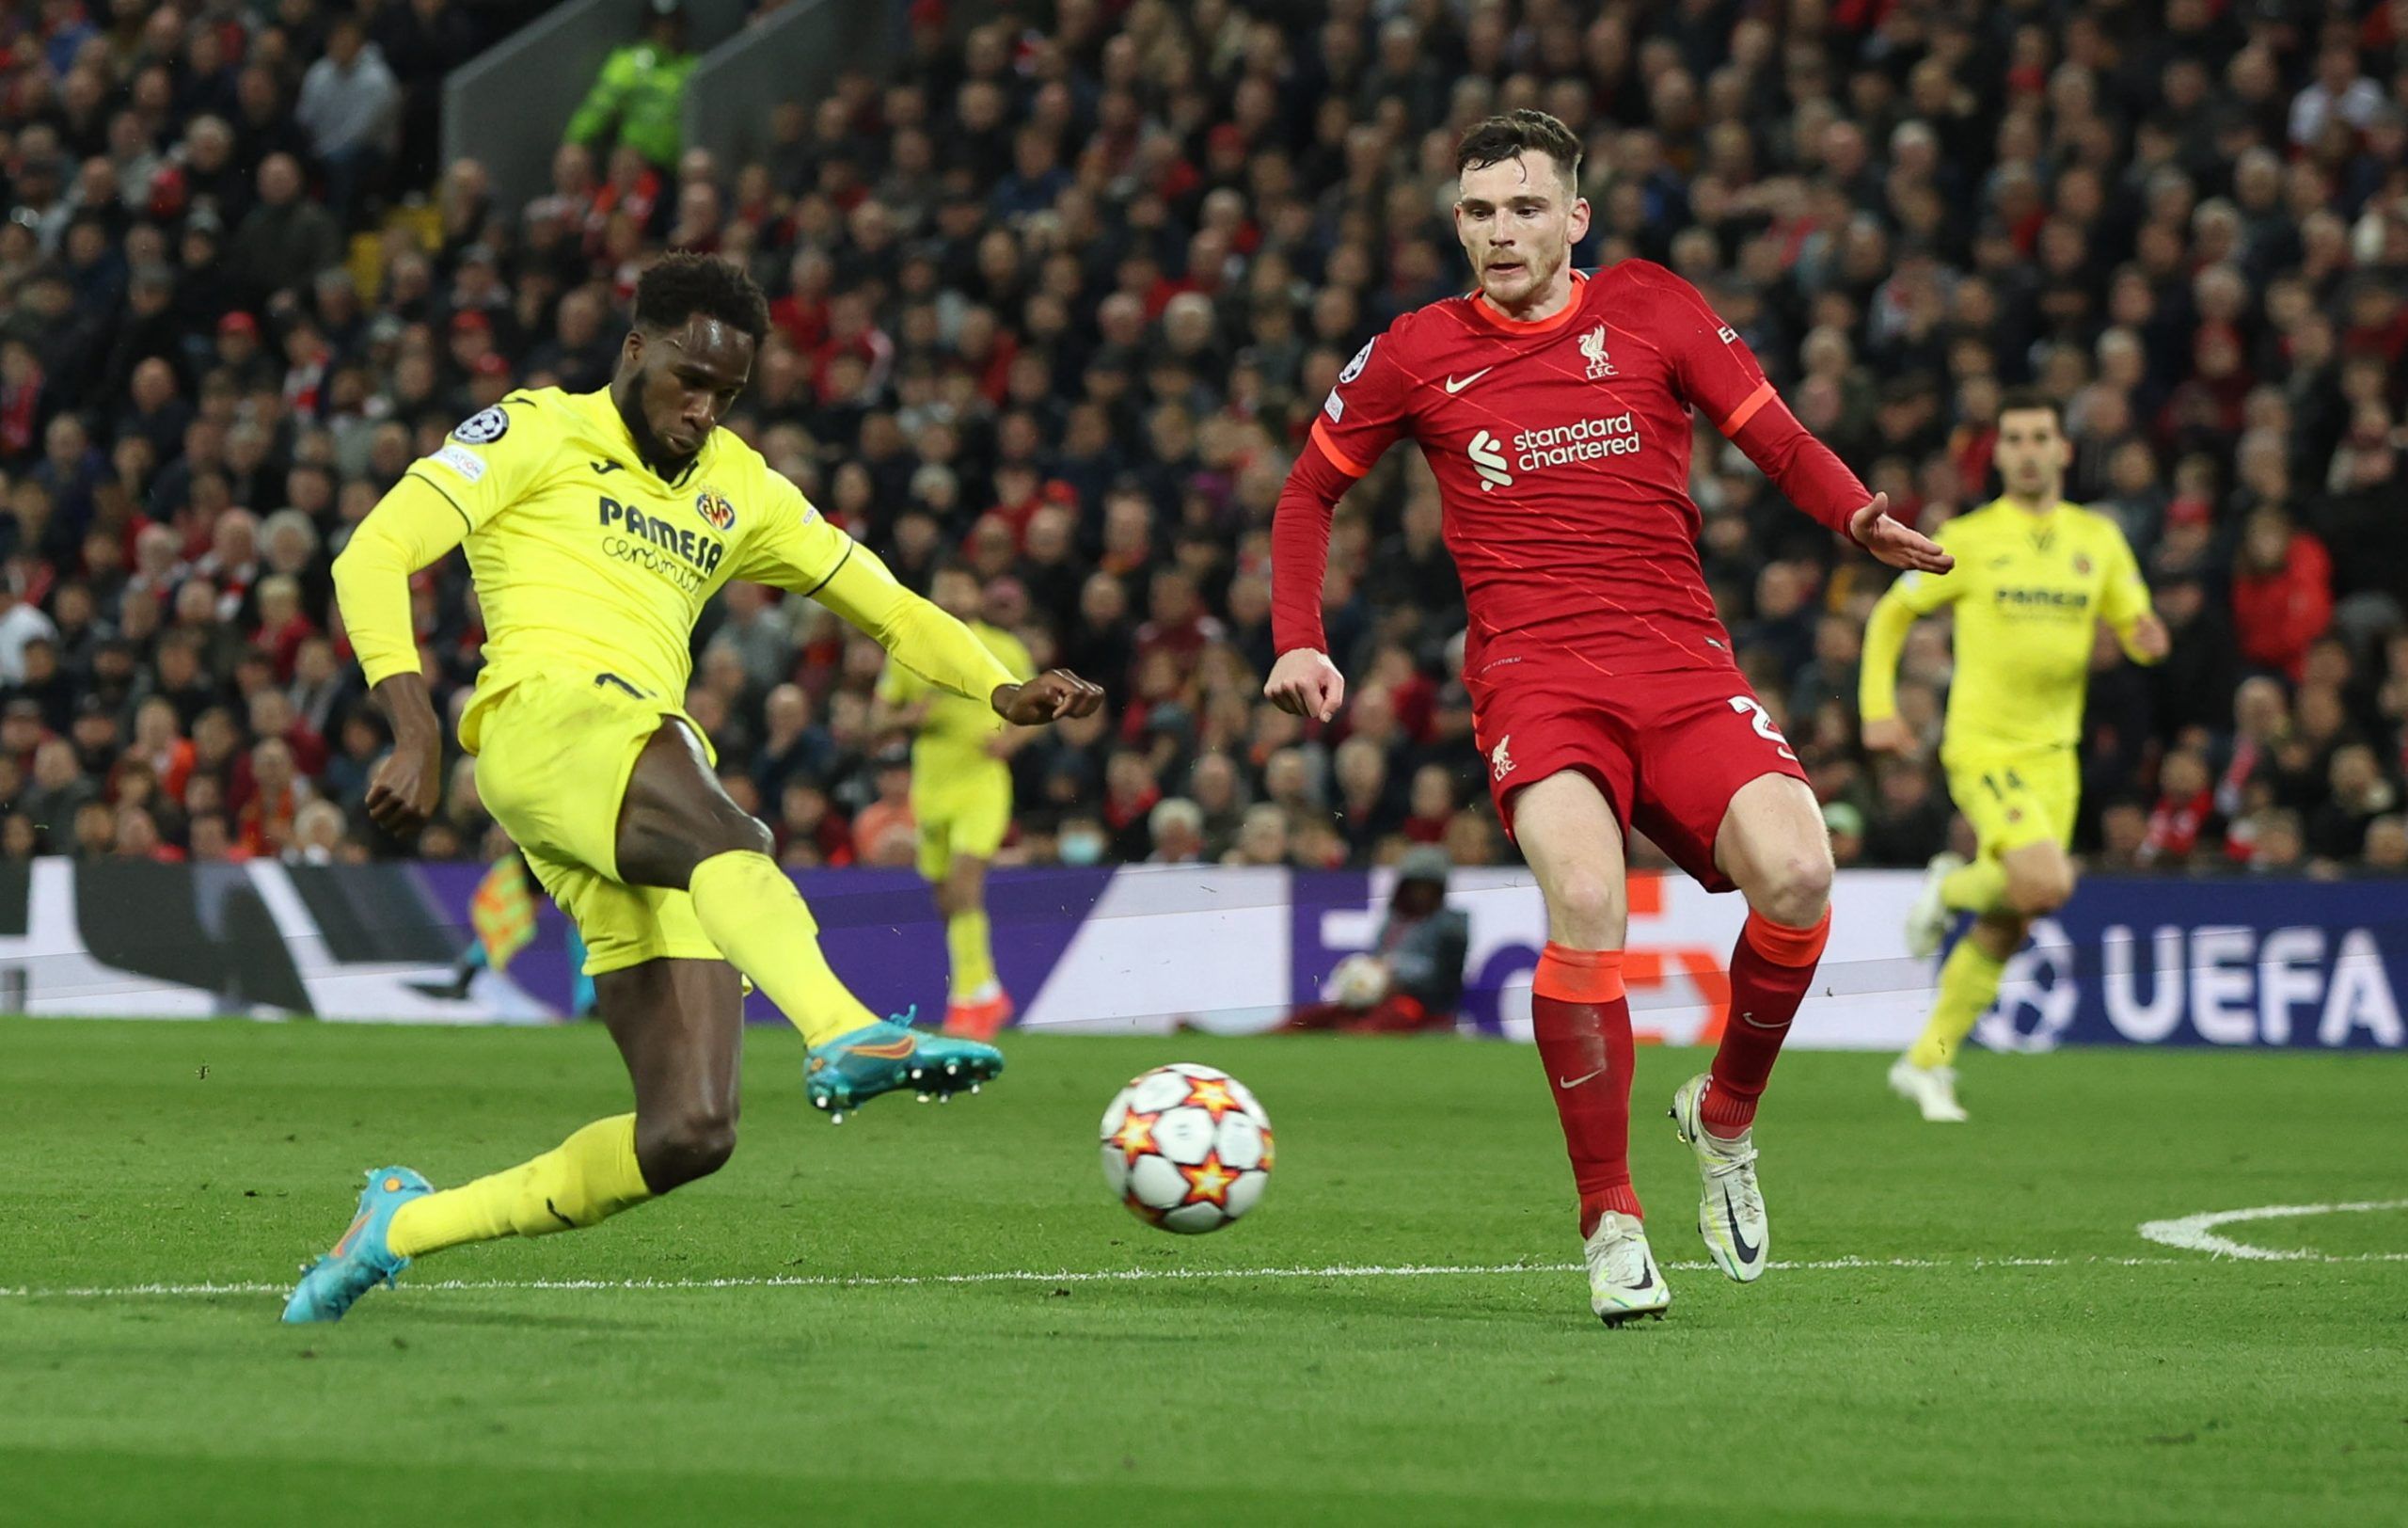 Soccer Football - Champions League - Semi Final - First Leg - Liverpool v Villarreal - Anfield, Liverpool, Britain - April 27, 2022 Villarreal's Boulaye Dia in action with Liverpool's Andrew Robertson REUTERS/Phil Noble